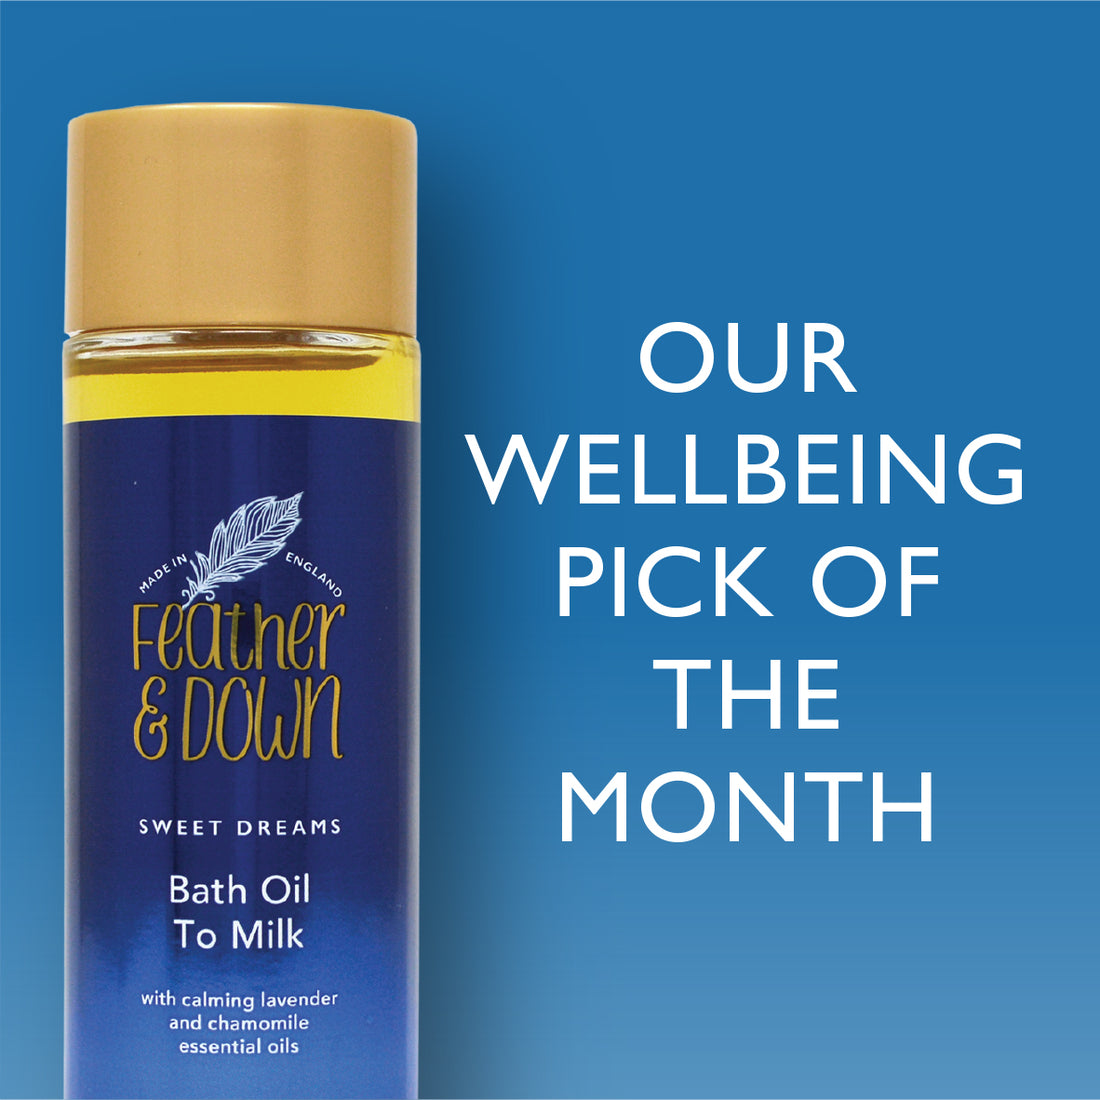 Wellbeing Product of the Month - August 2020 - Bath Oil to Milk